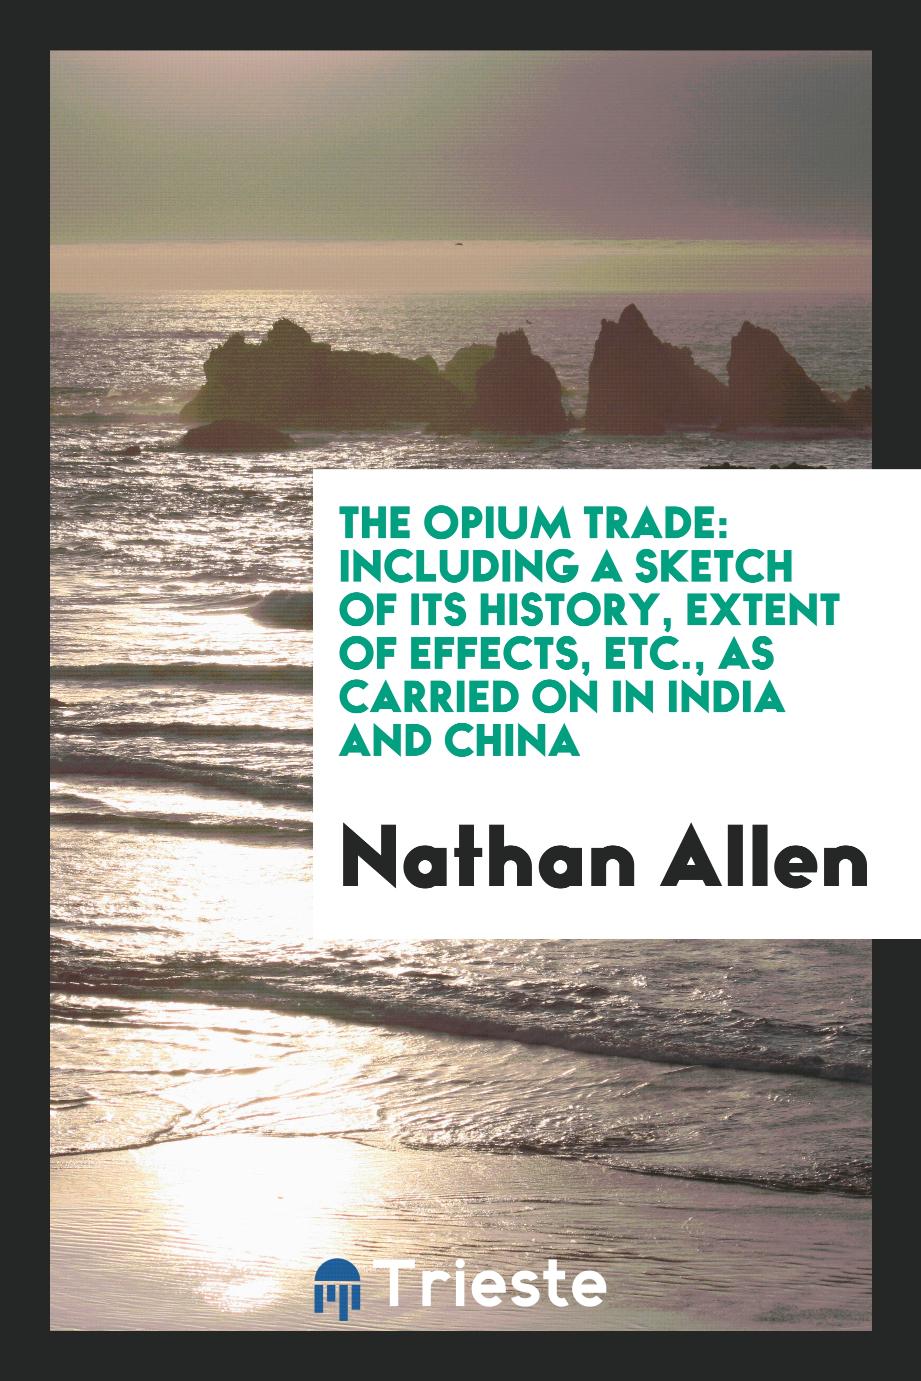 The opium trade: Including a Sketch of Its History, Extent of Effects, Etc., as Carried on in India and China